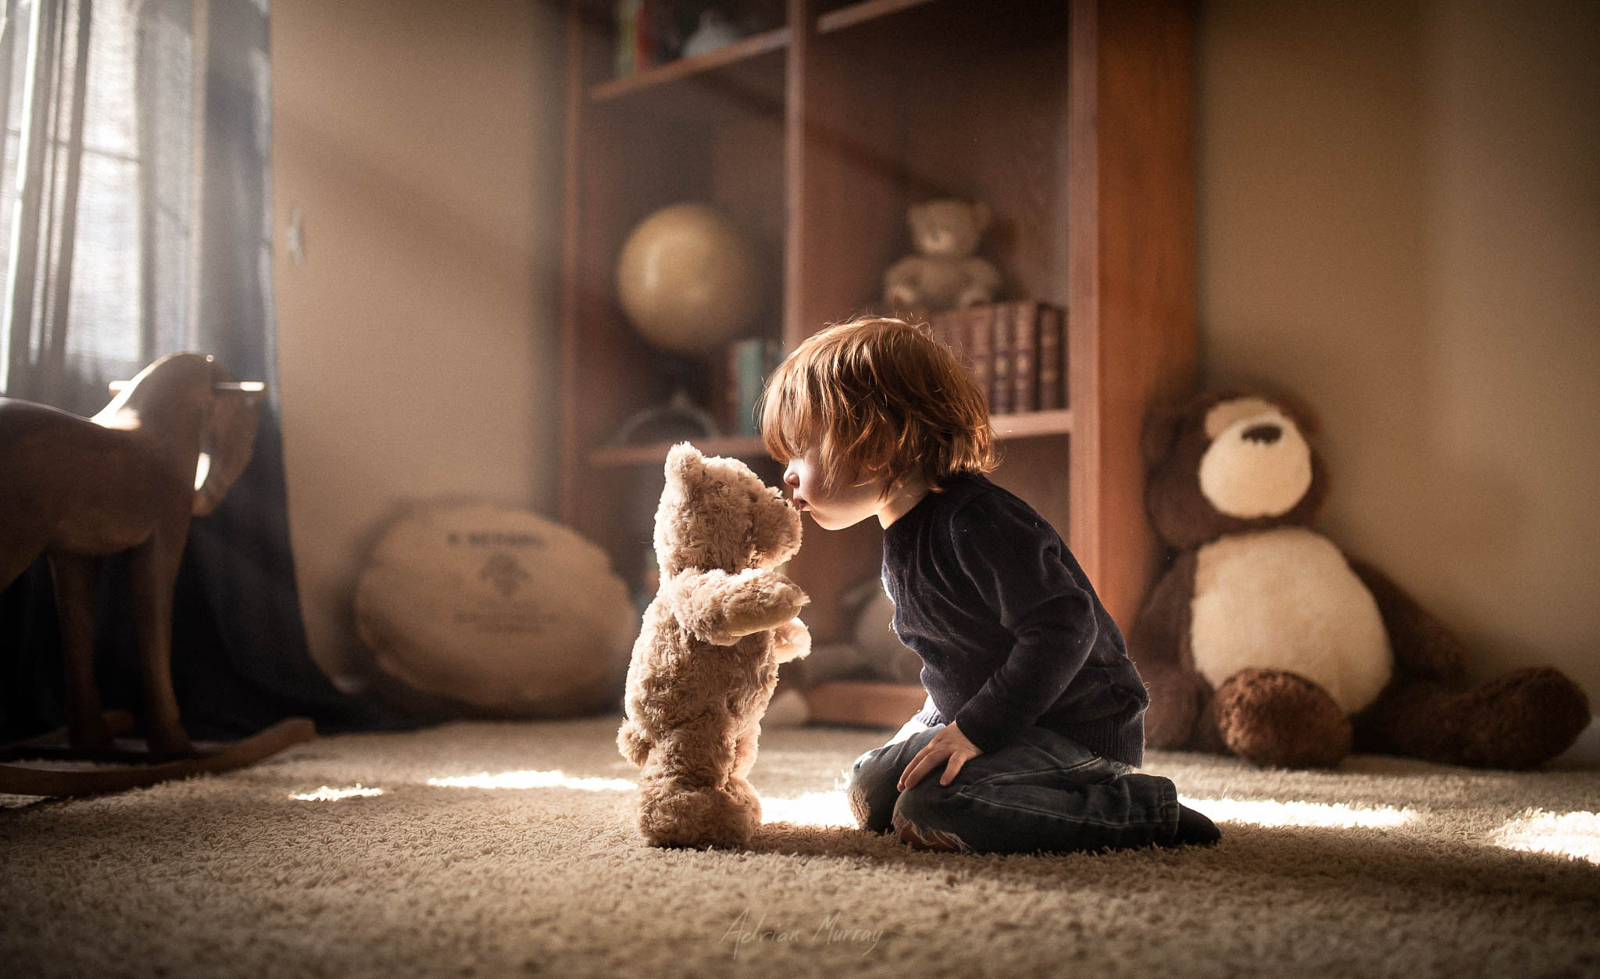 Top 20 Family Photos On 500px So Far This Year 500px